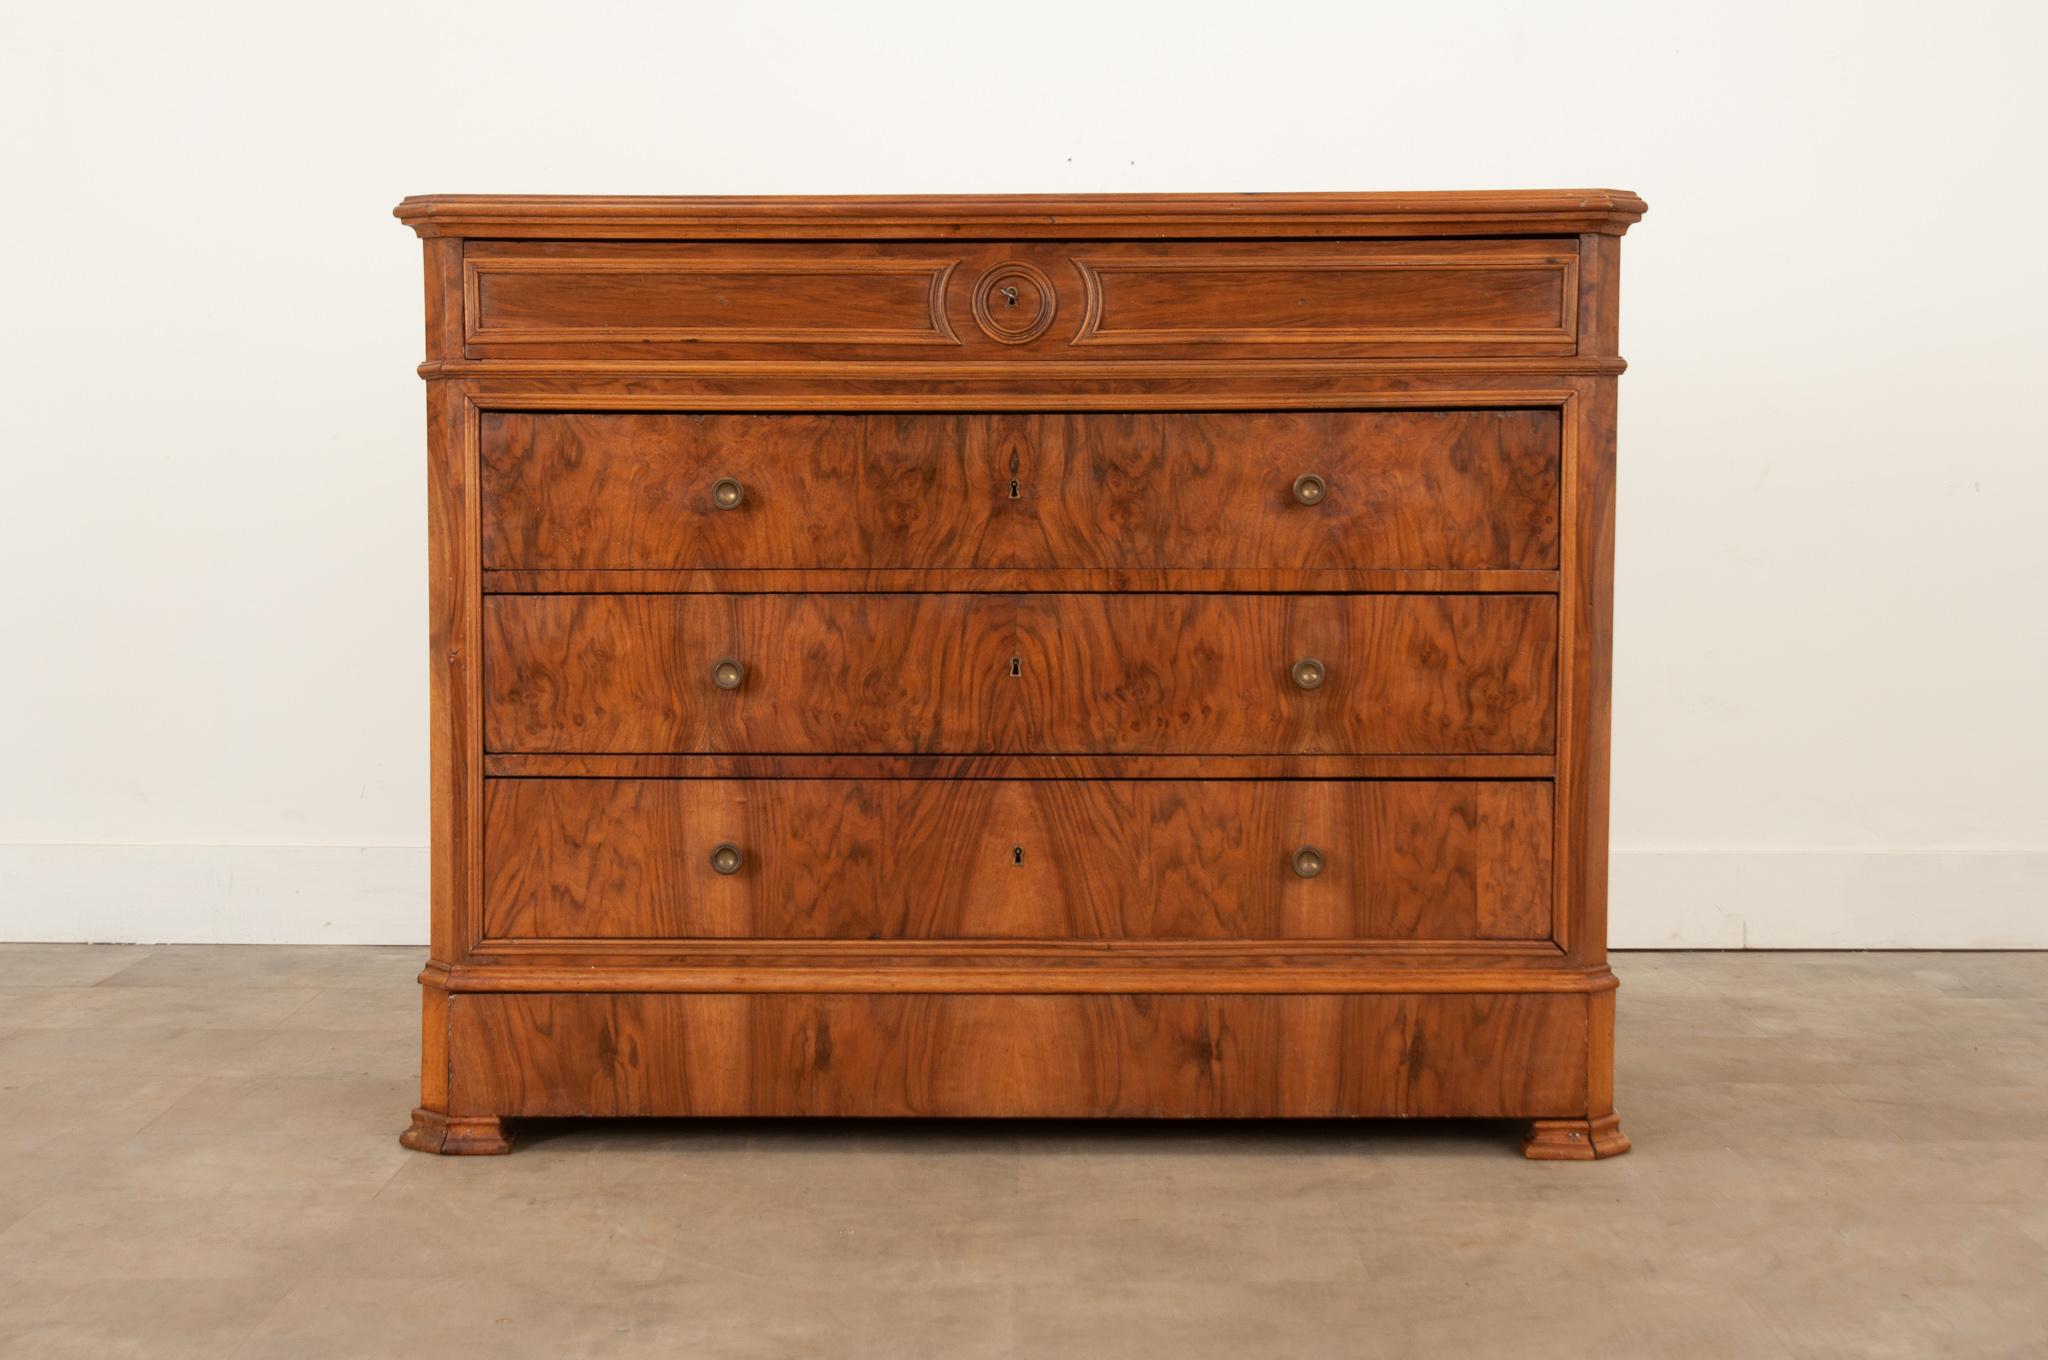 A truly stunning Louis Philippe style mahogany commode walnut crafted in France circa 1870. Five bookmatched drawers provide plenty of storage space. The top surface showcases the wood grain perfectly. The top drawer is beautifully paneled while the